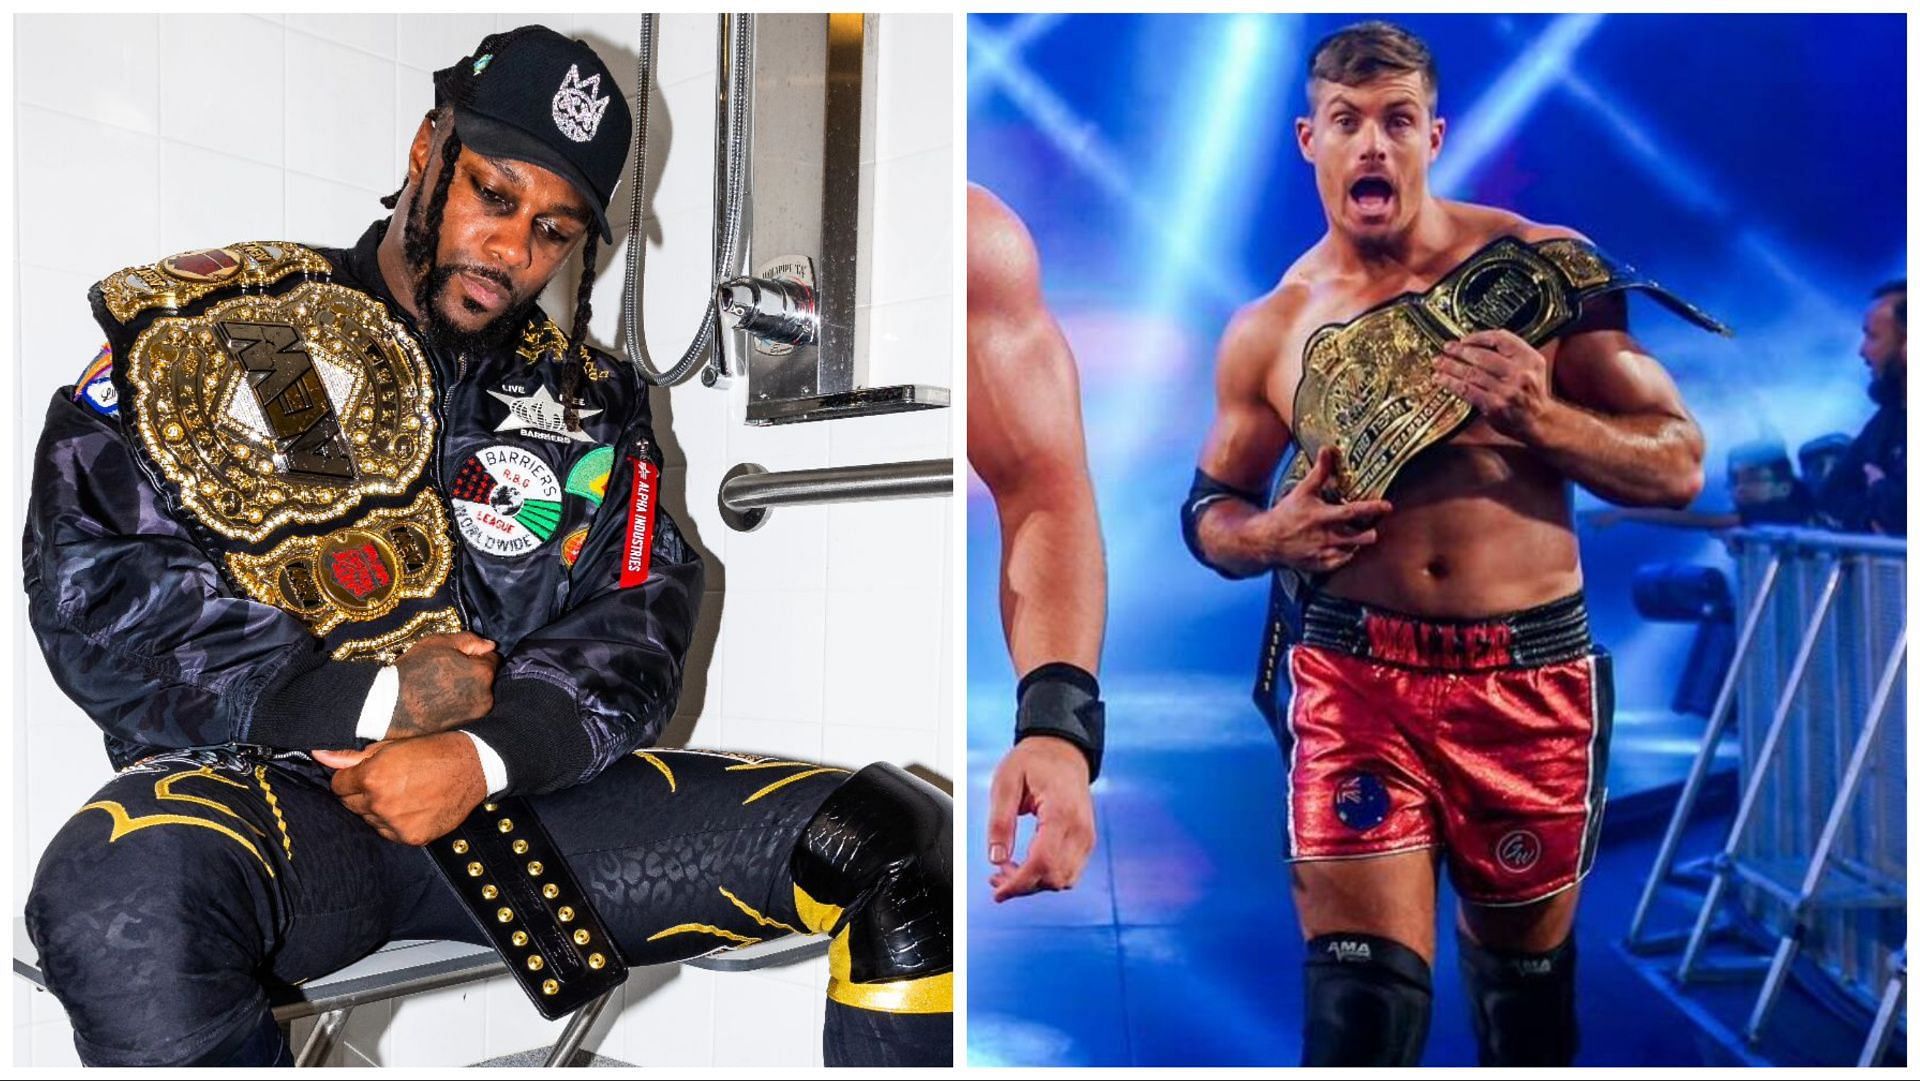 Swerve Strickland sits with the AEW World Championship, Grayson Waller with his SmackDown Tag Team Championship